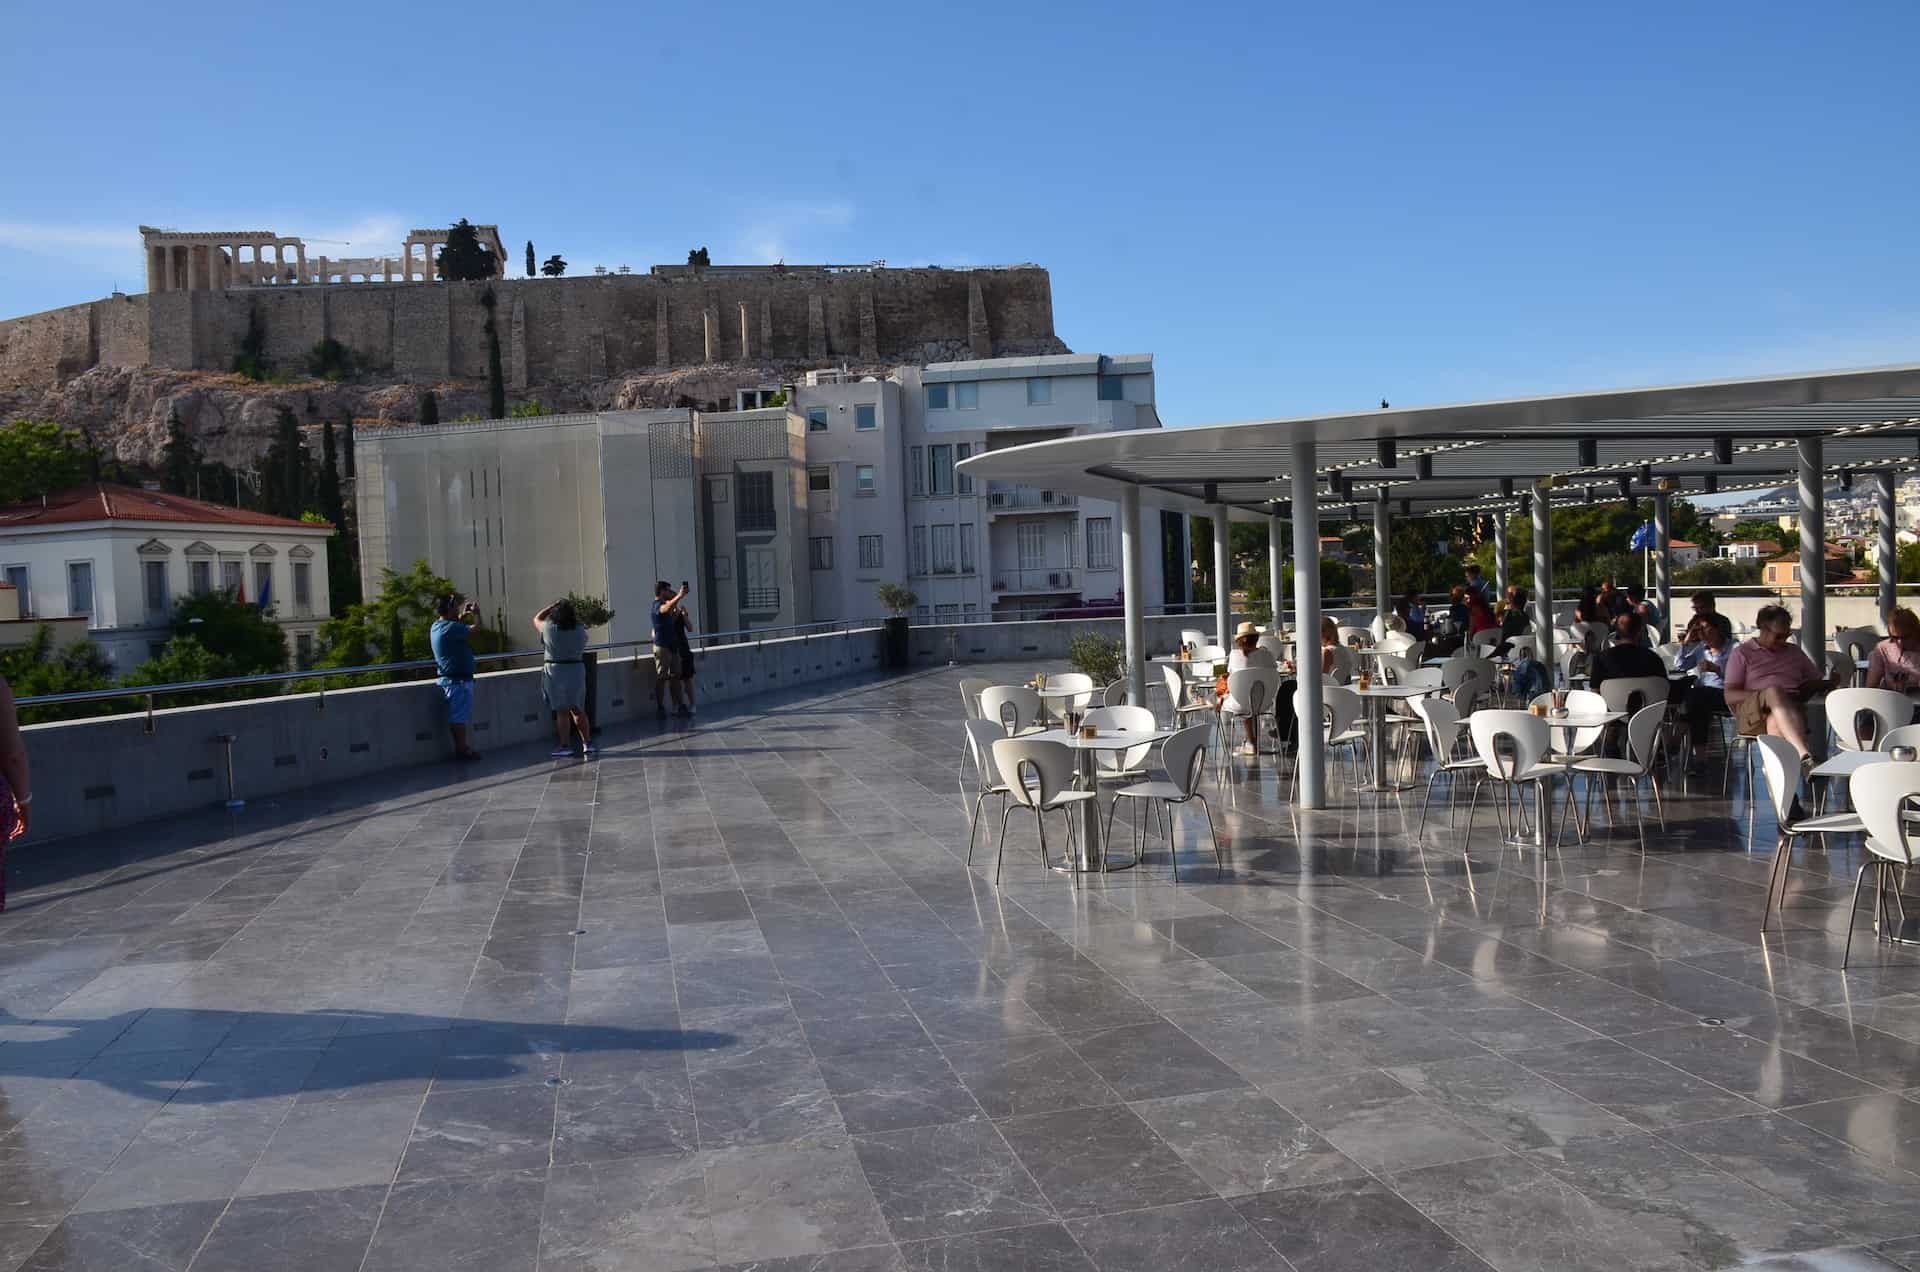 Restaurant terrace of the Acropolis Museum in Athens, Greece